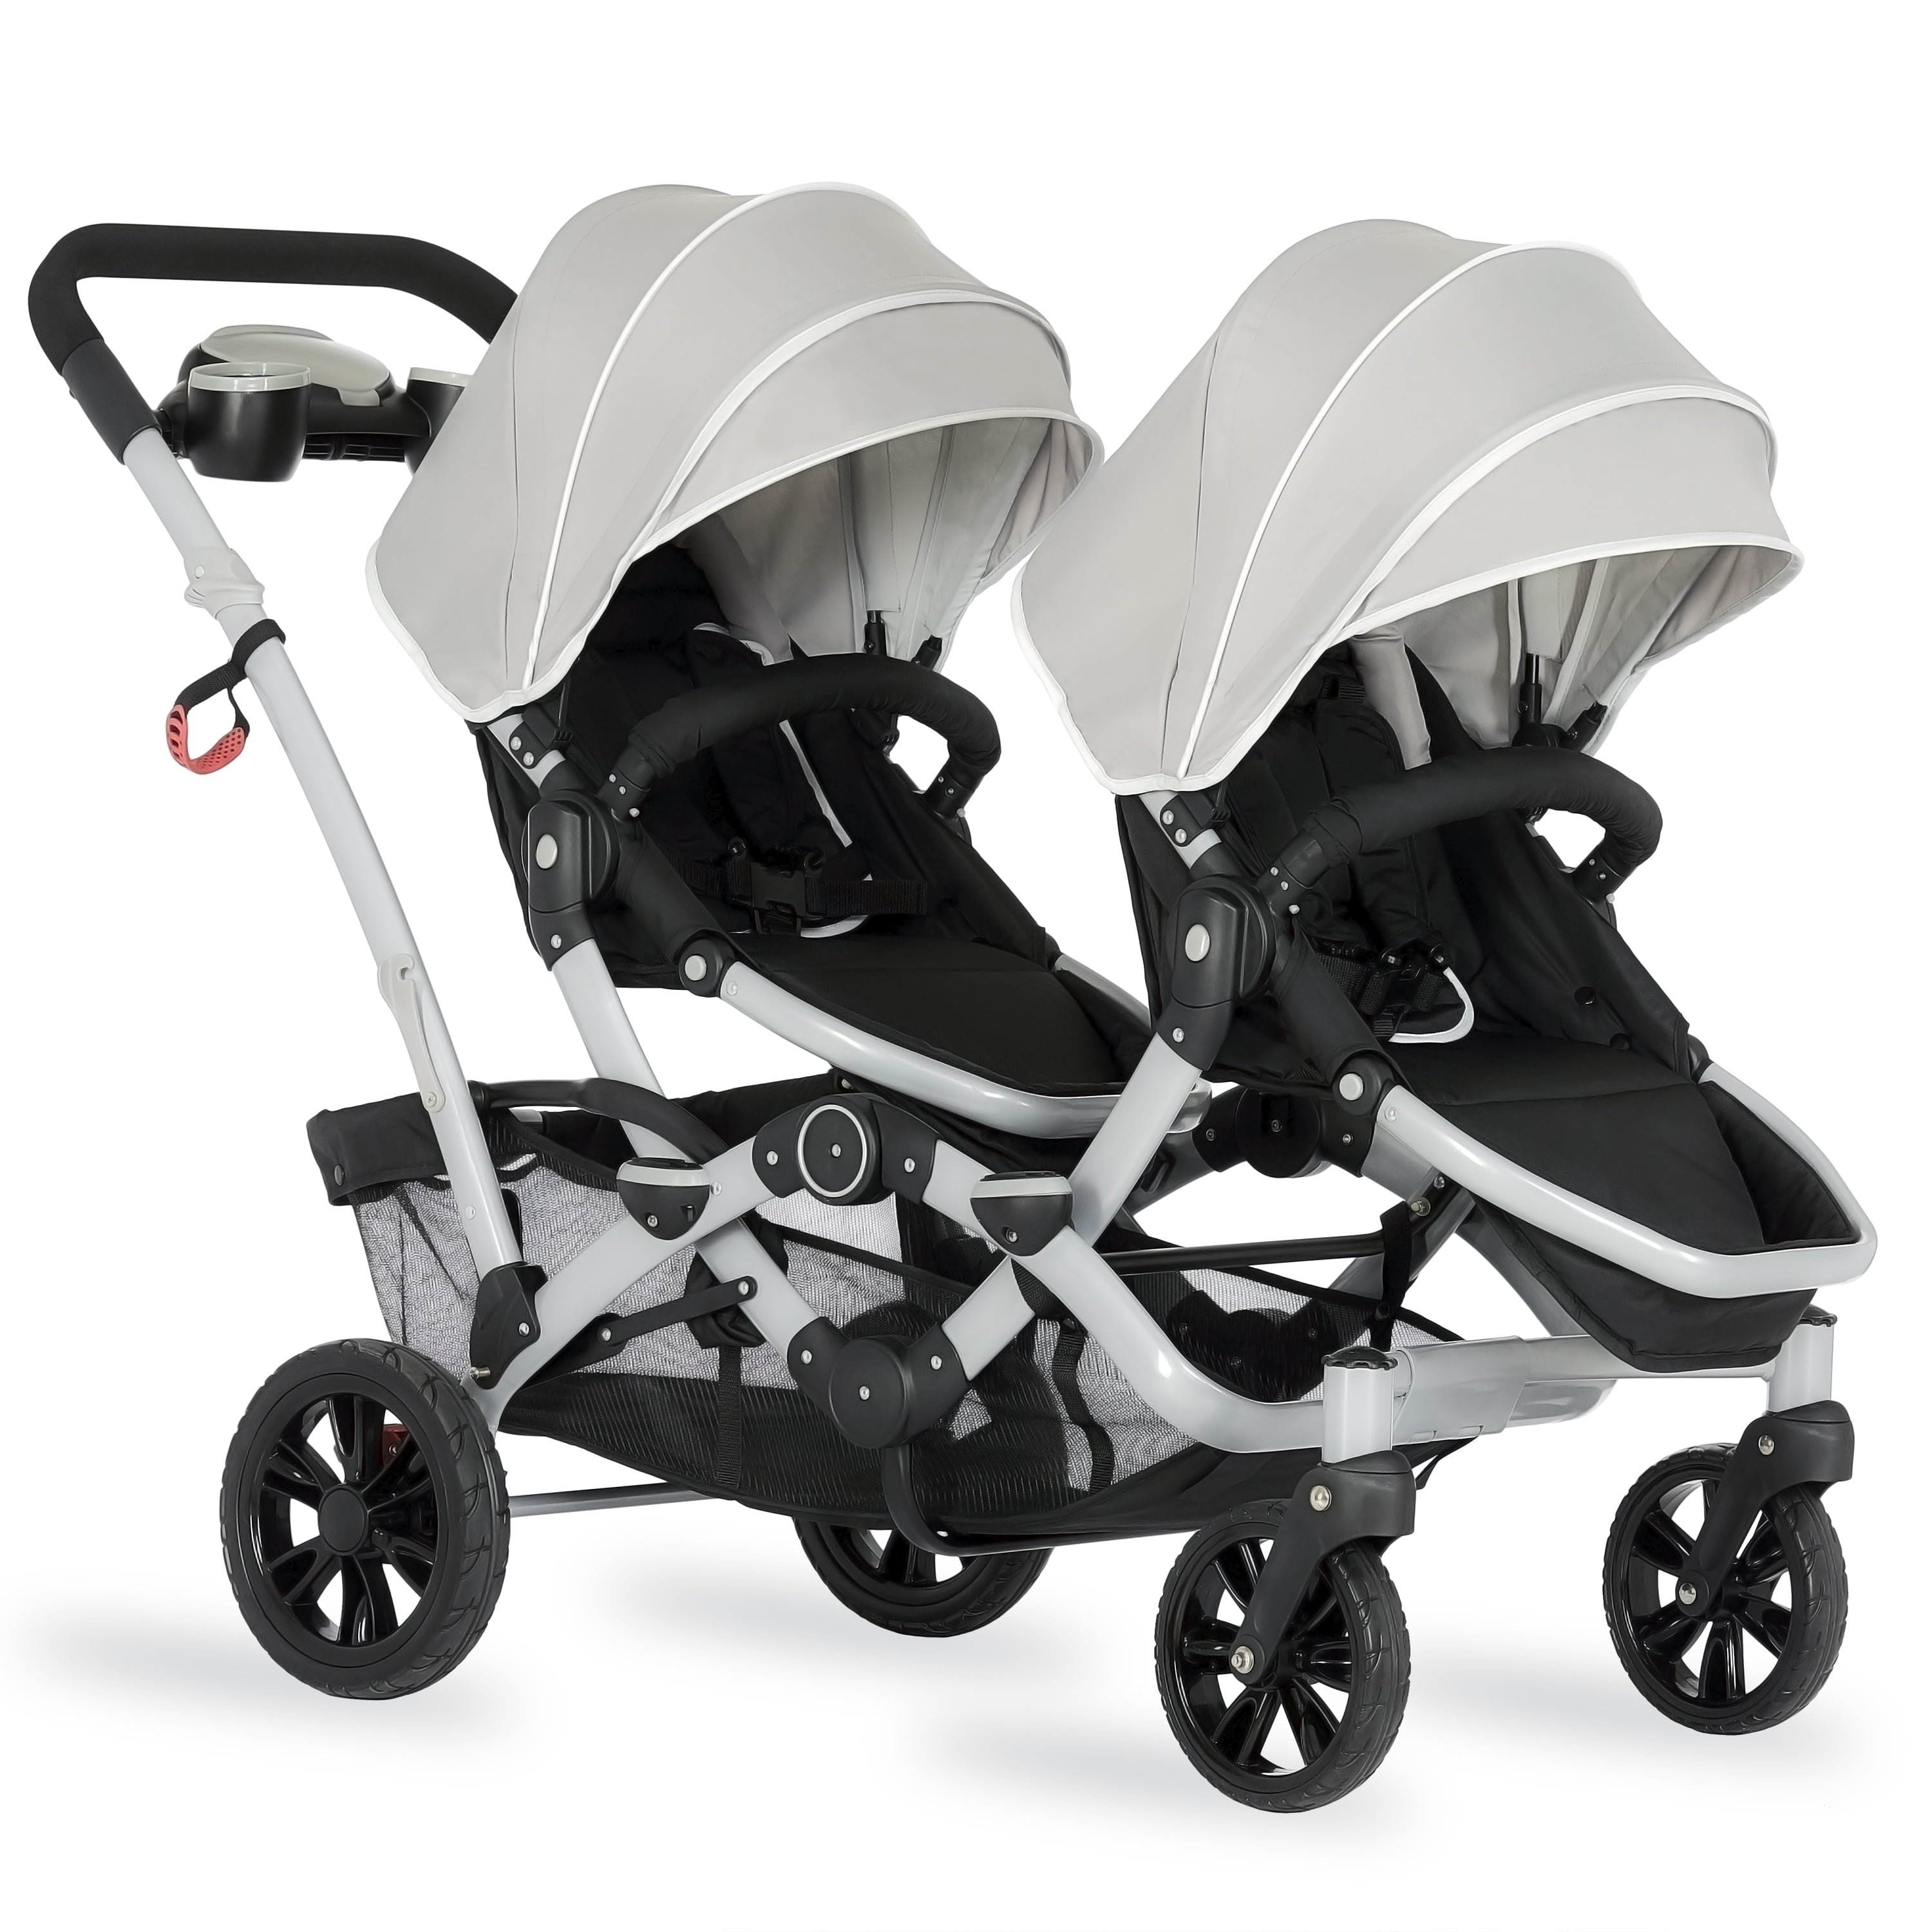 Carseat Baby Tandem Double Twin Pram Travel System Grey Carrycot & Raincover 